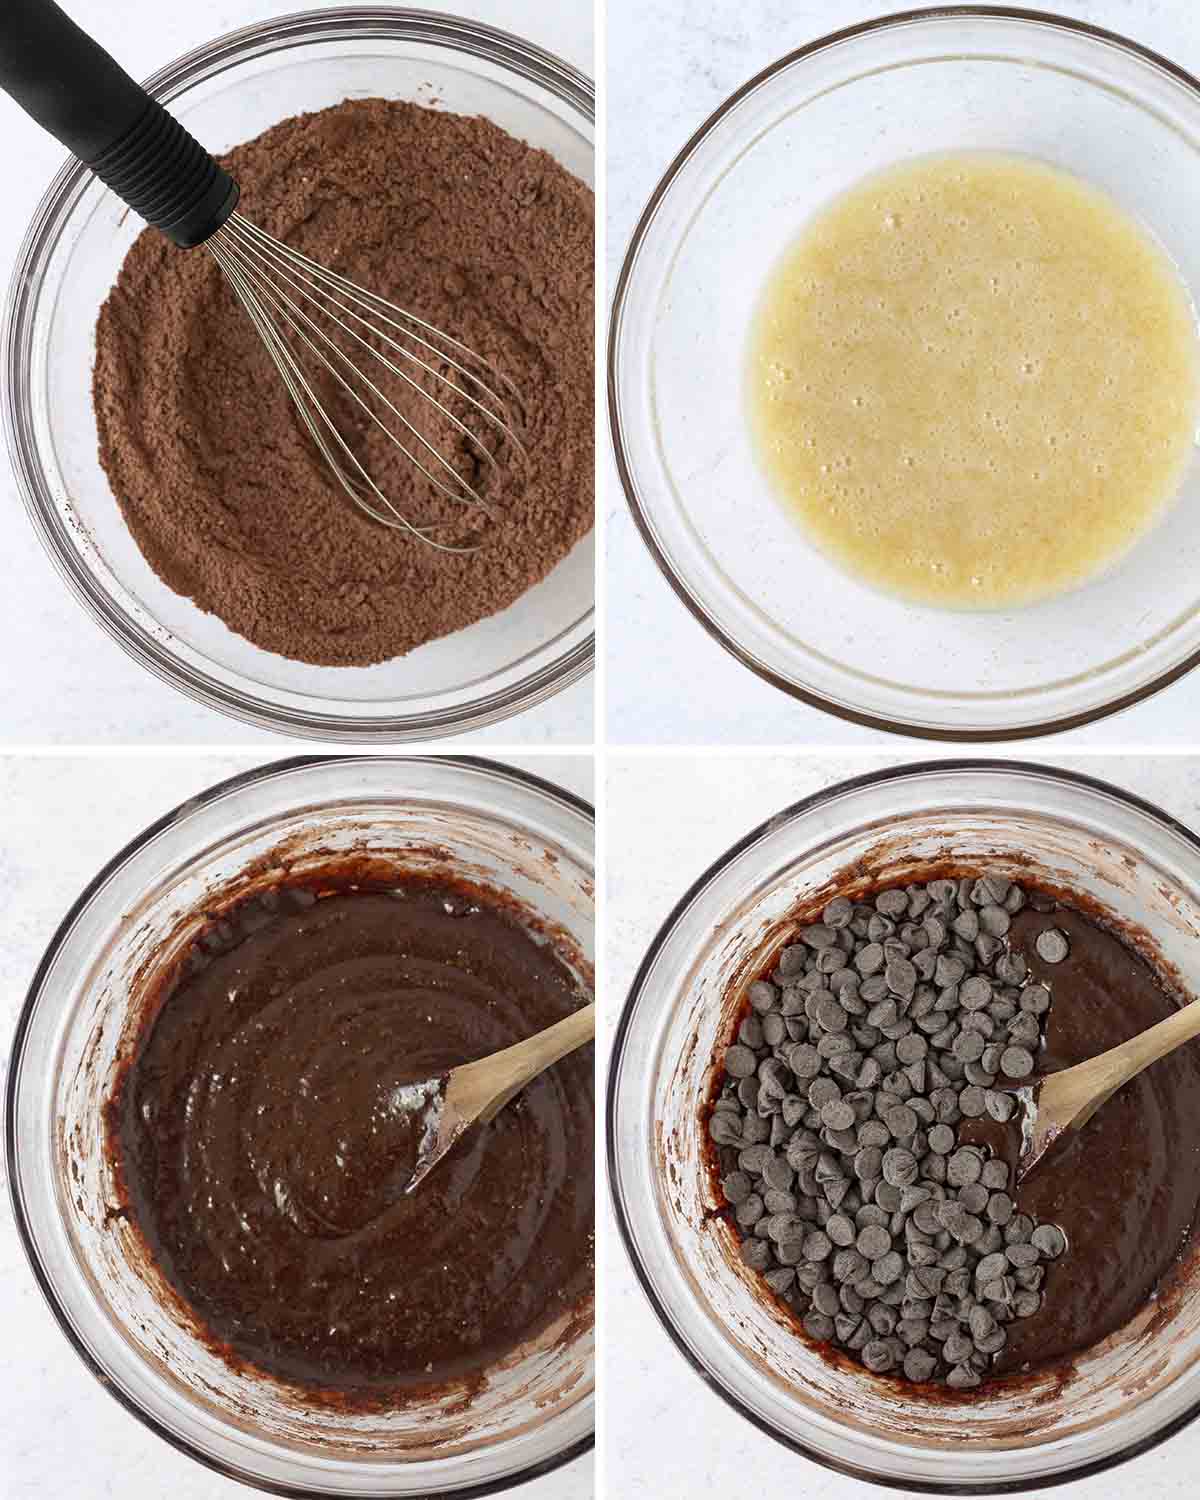 A collage of four images showing the sequence of steps needed to make dairy-free gluten-free brownies.